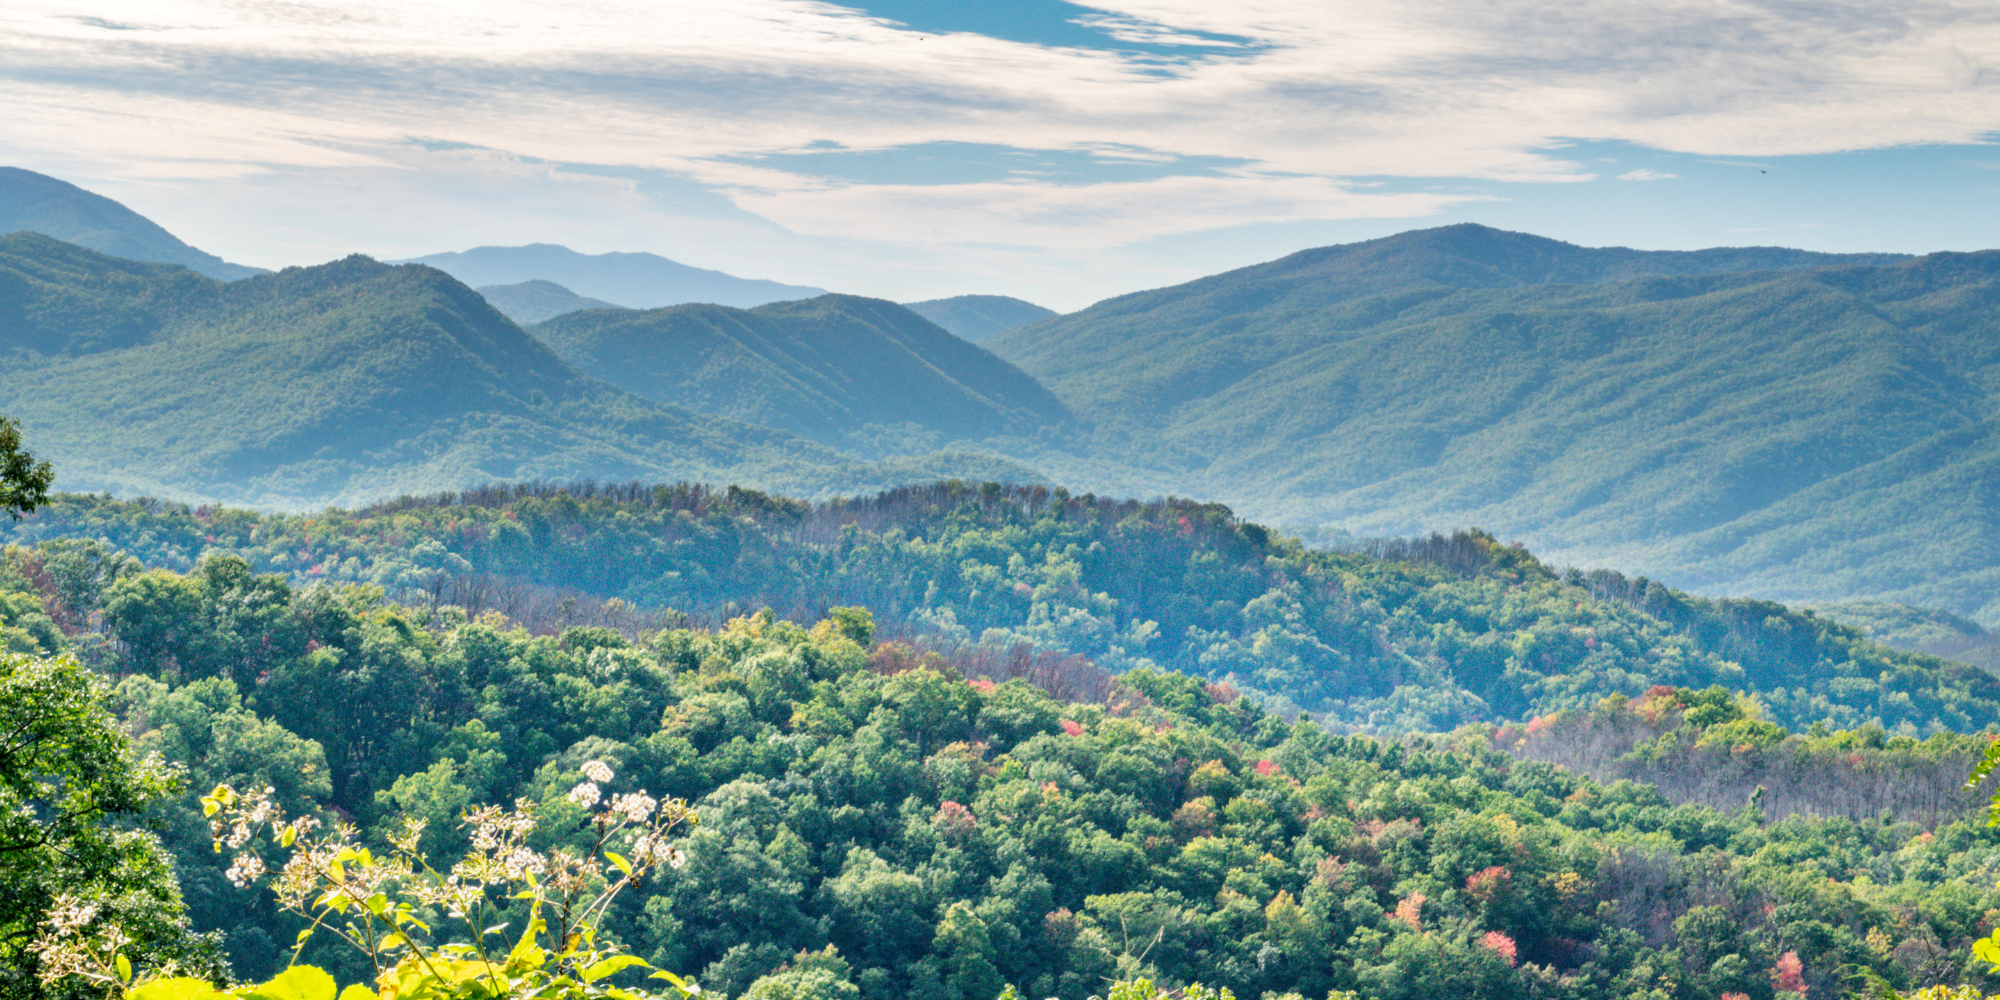 A view of the Great Smokey Mountain National Park in Autumn